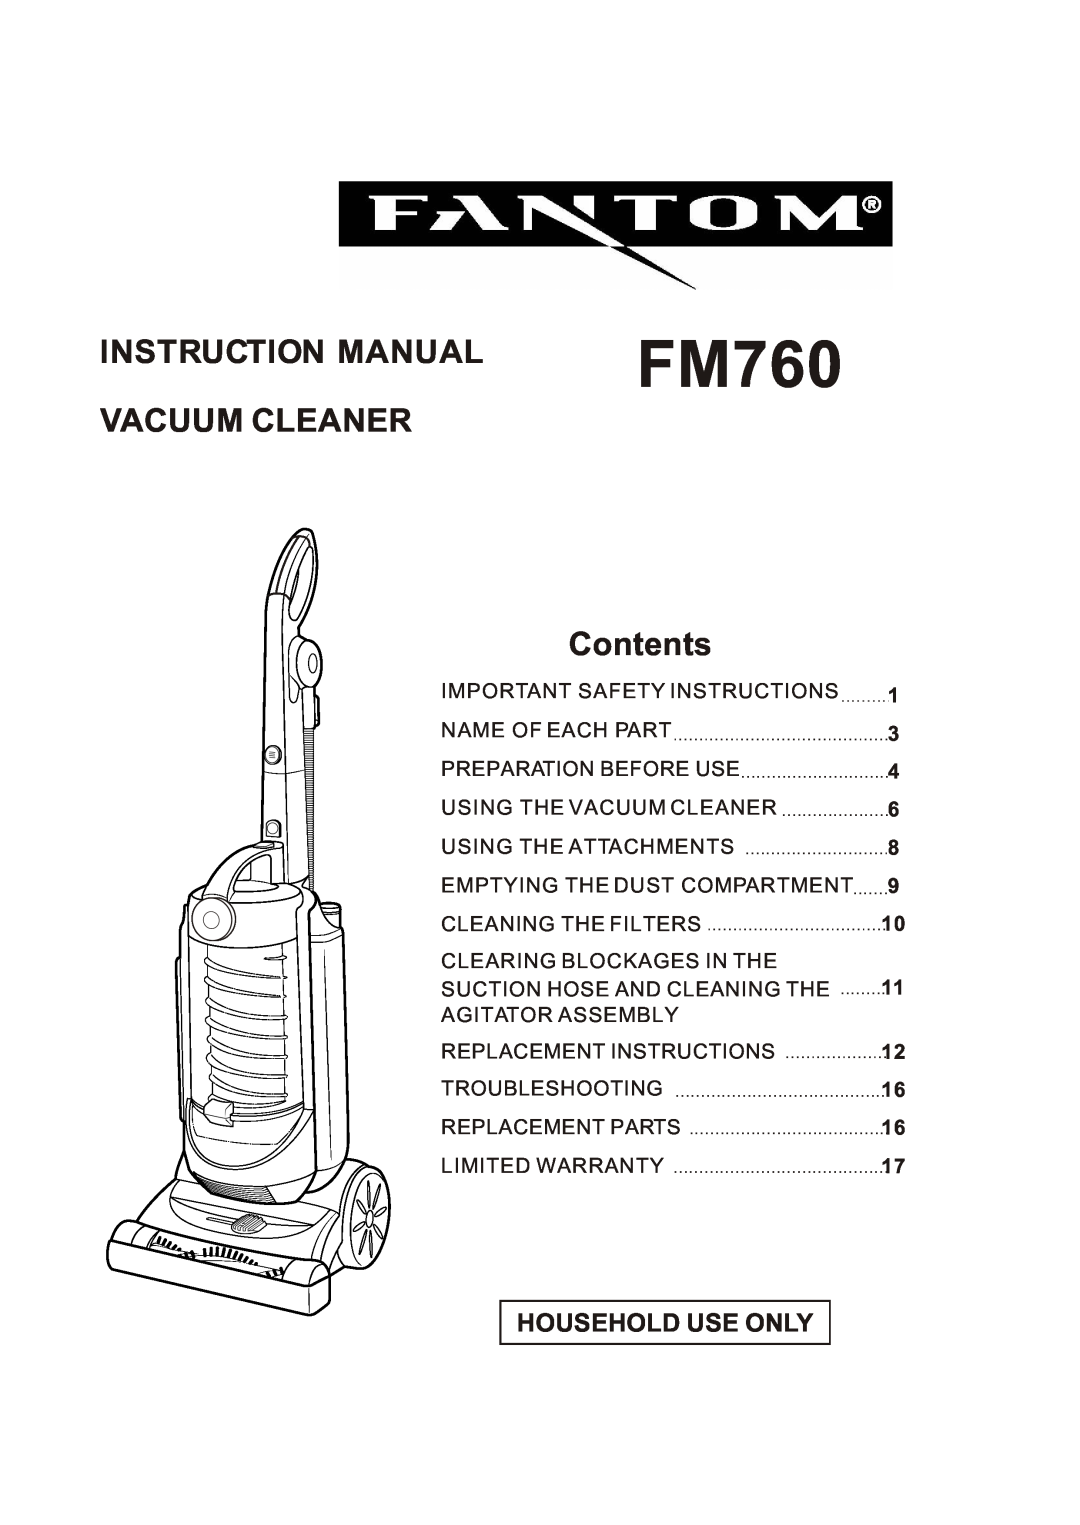 Fantom Vacuum FM760 instruction manual Vacuum Cleaner, Contents, Household Use Only, 1 3 4 6 8 9 